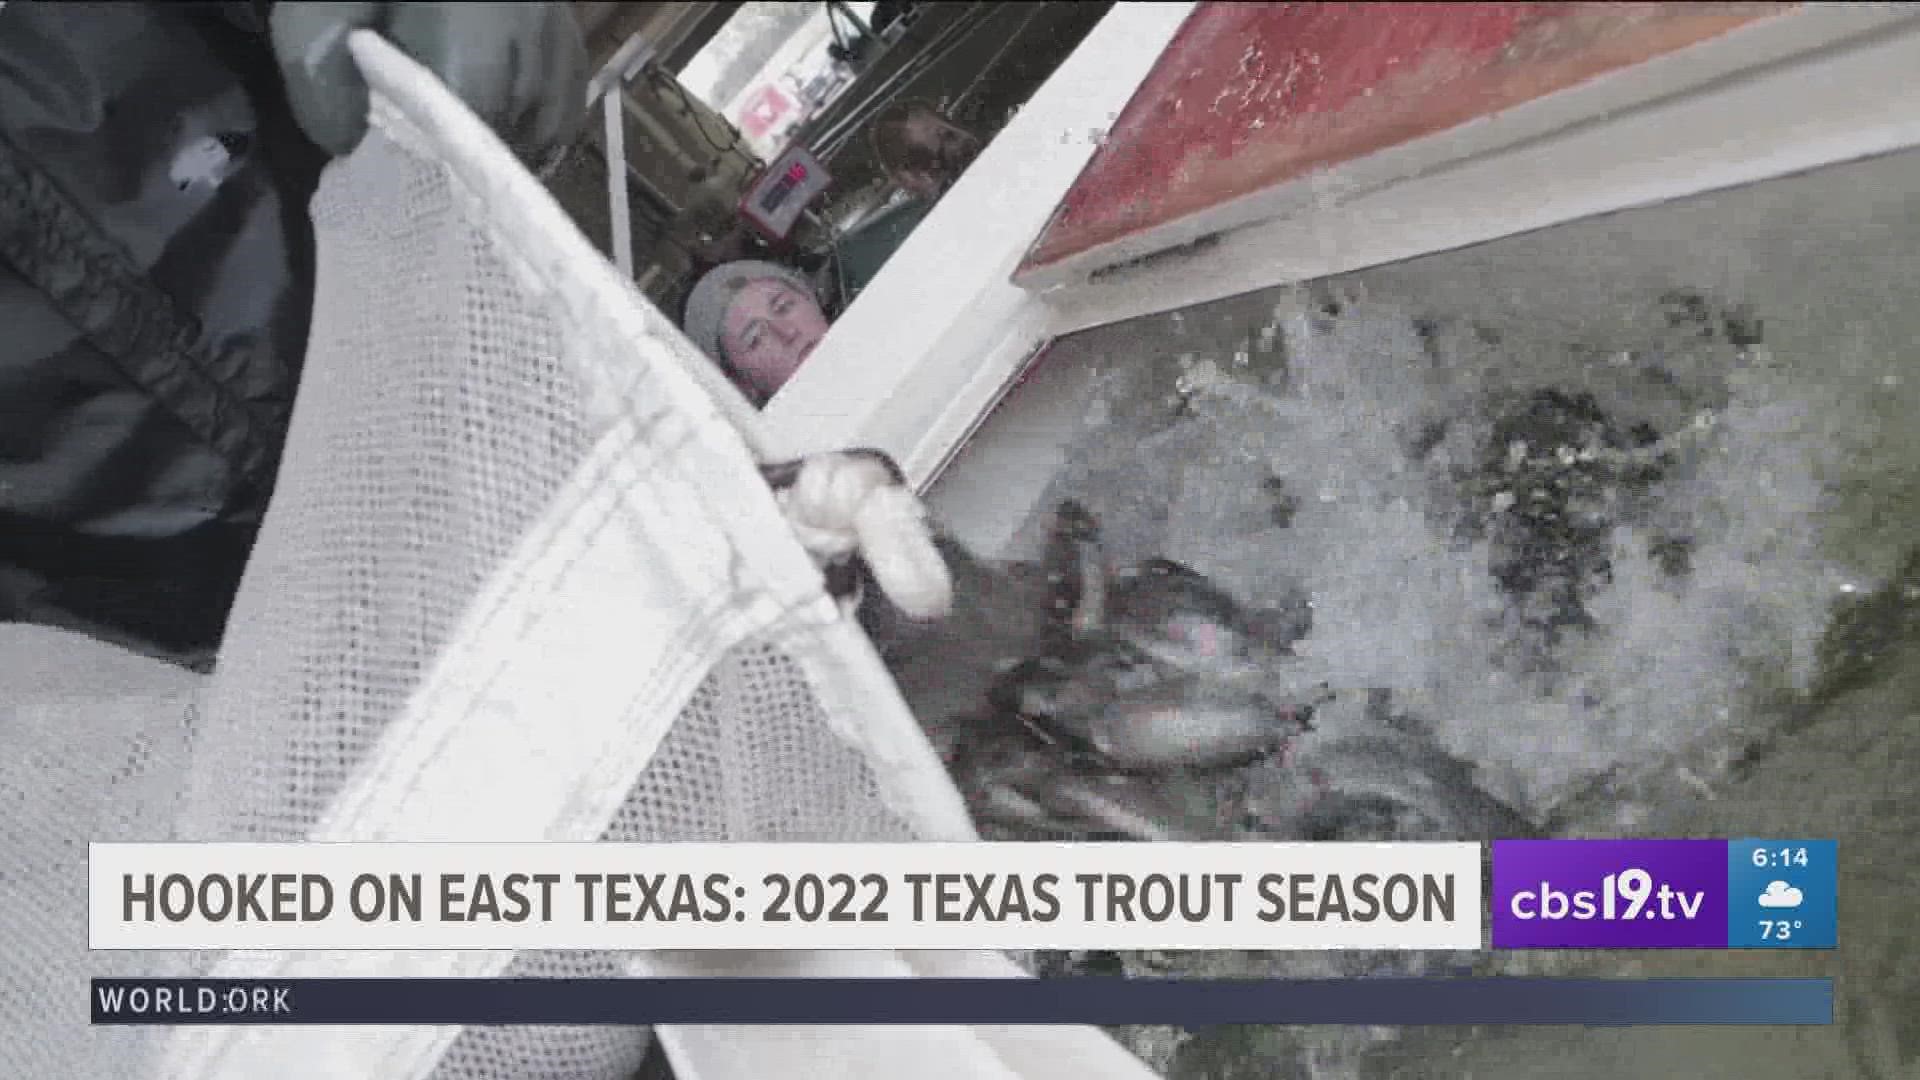 For more stories visit cbs19.tv/hooked-on-east-texas